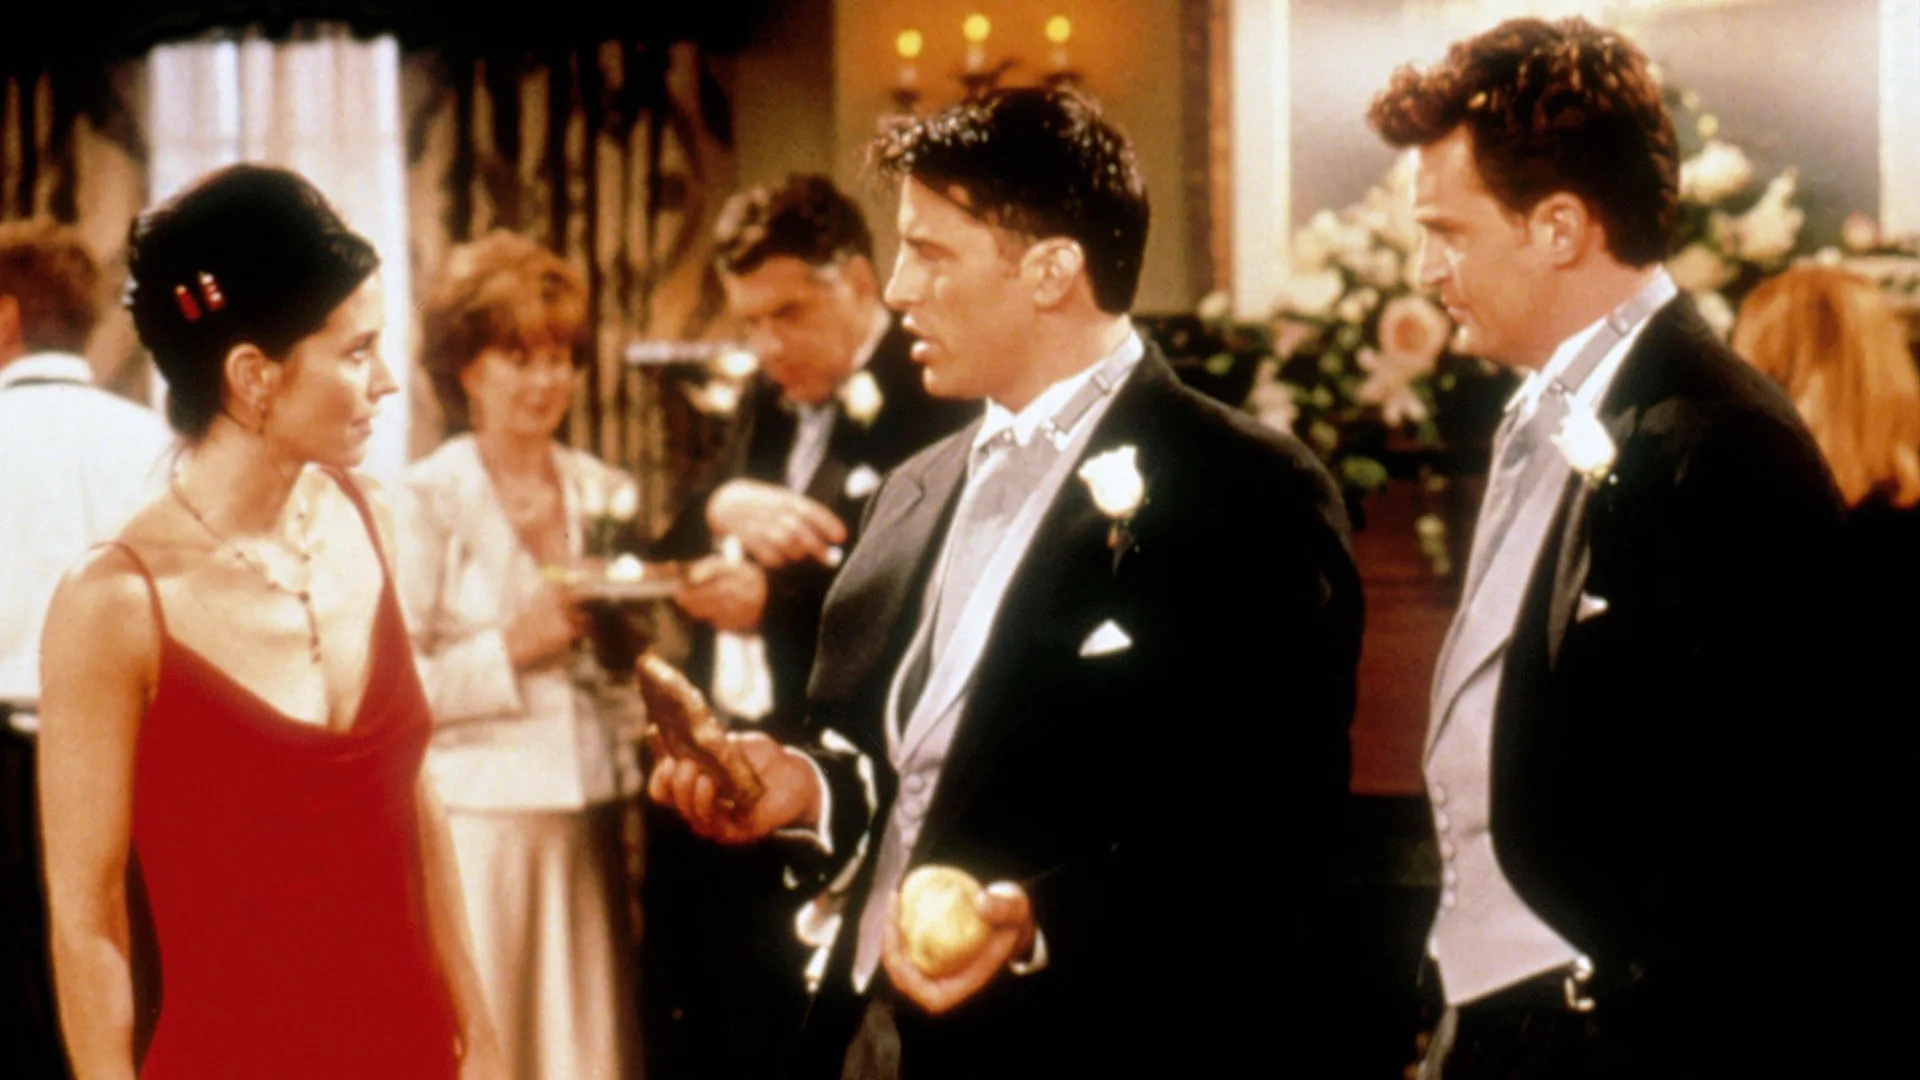 A photograph of Monica, Joey and Chandler in a scene from the TV show Friends all wearing evening wear having what looks like a tense discussion. Monika is in a red dress and Joey and Chandler are in dinner suits. Behind them are two people looking at an invite.